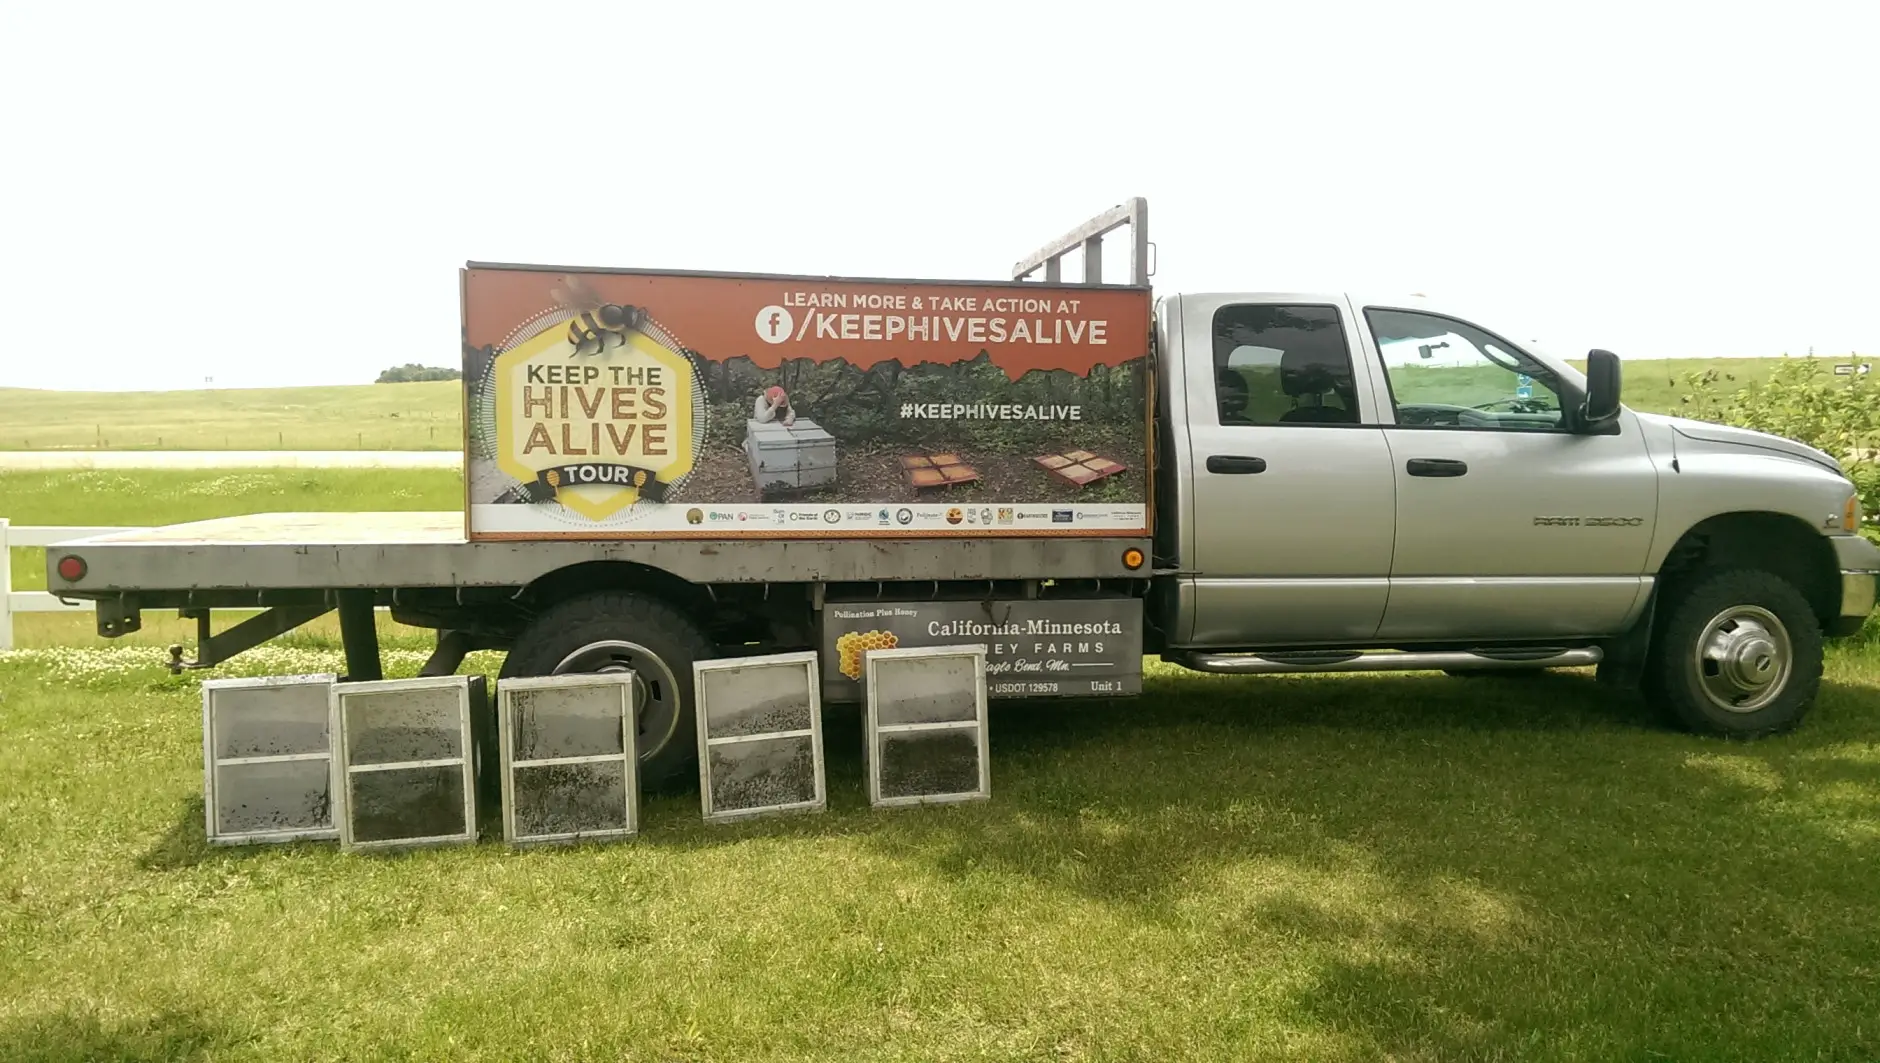 This June 13, 2016 photo provided by Friends of the Earth shows a truck that is carrying more than 2.5 million dead bees in Estelle, S.D. The truck began a tour across the country with a stop in South Dakota Monday, in an effort to raise awareness doubt the collapse of bee colonies and other pollinators in the U.S. (Tiffany Finck-Haynes/Friends of the Earth via AP)